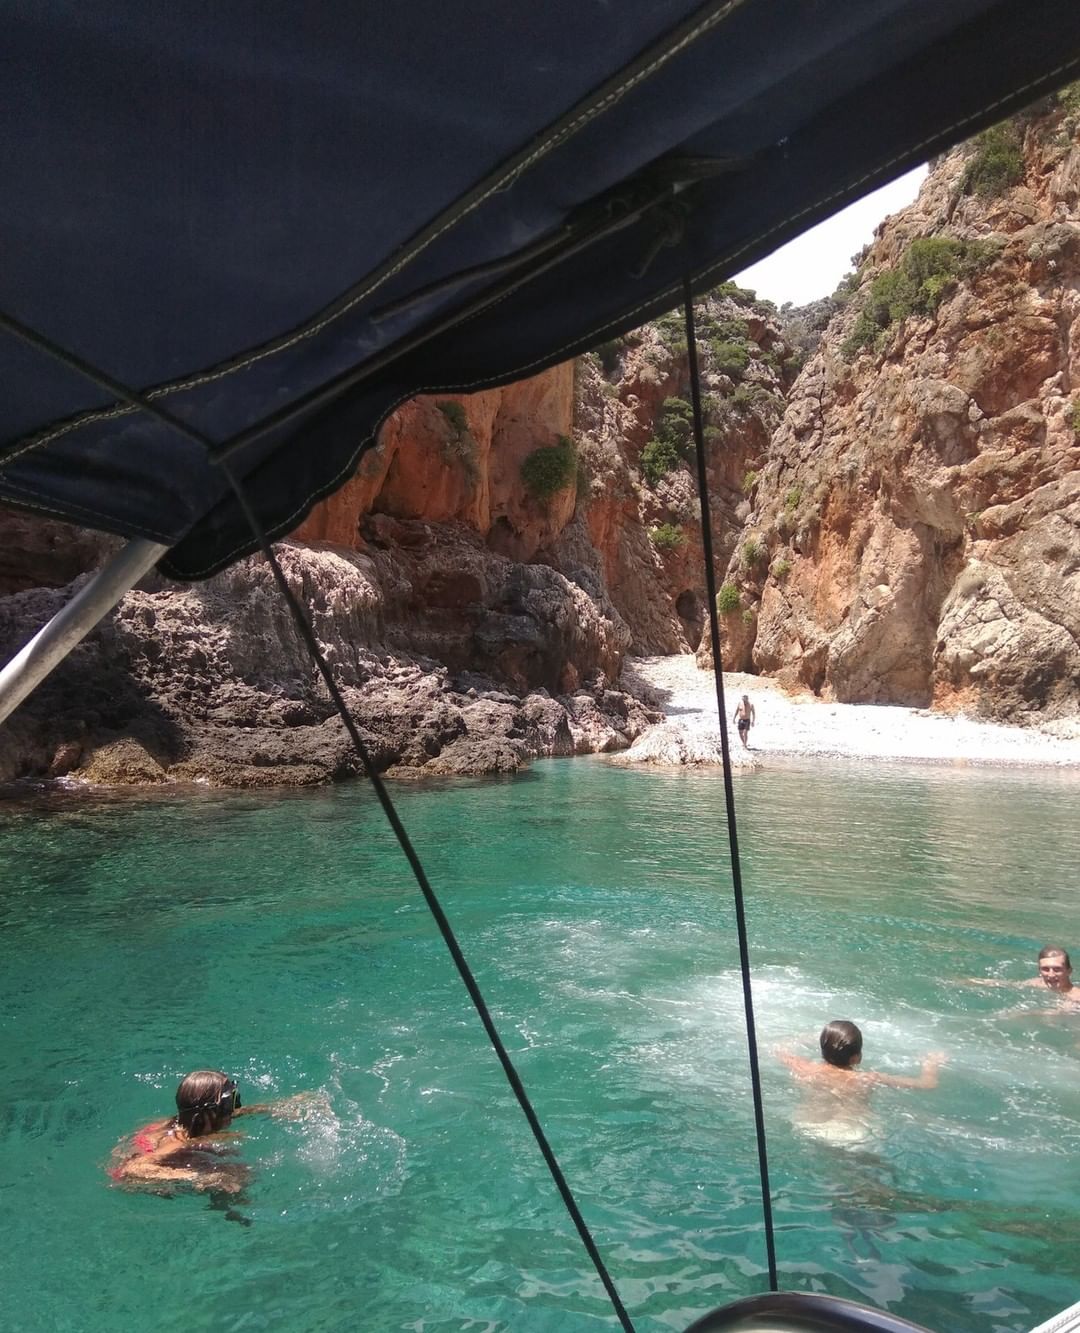 Rent a boat and visit the secret beaches of Crete